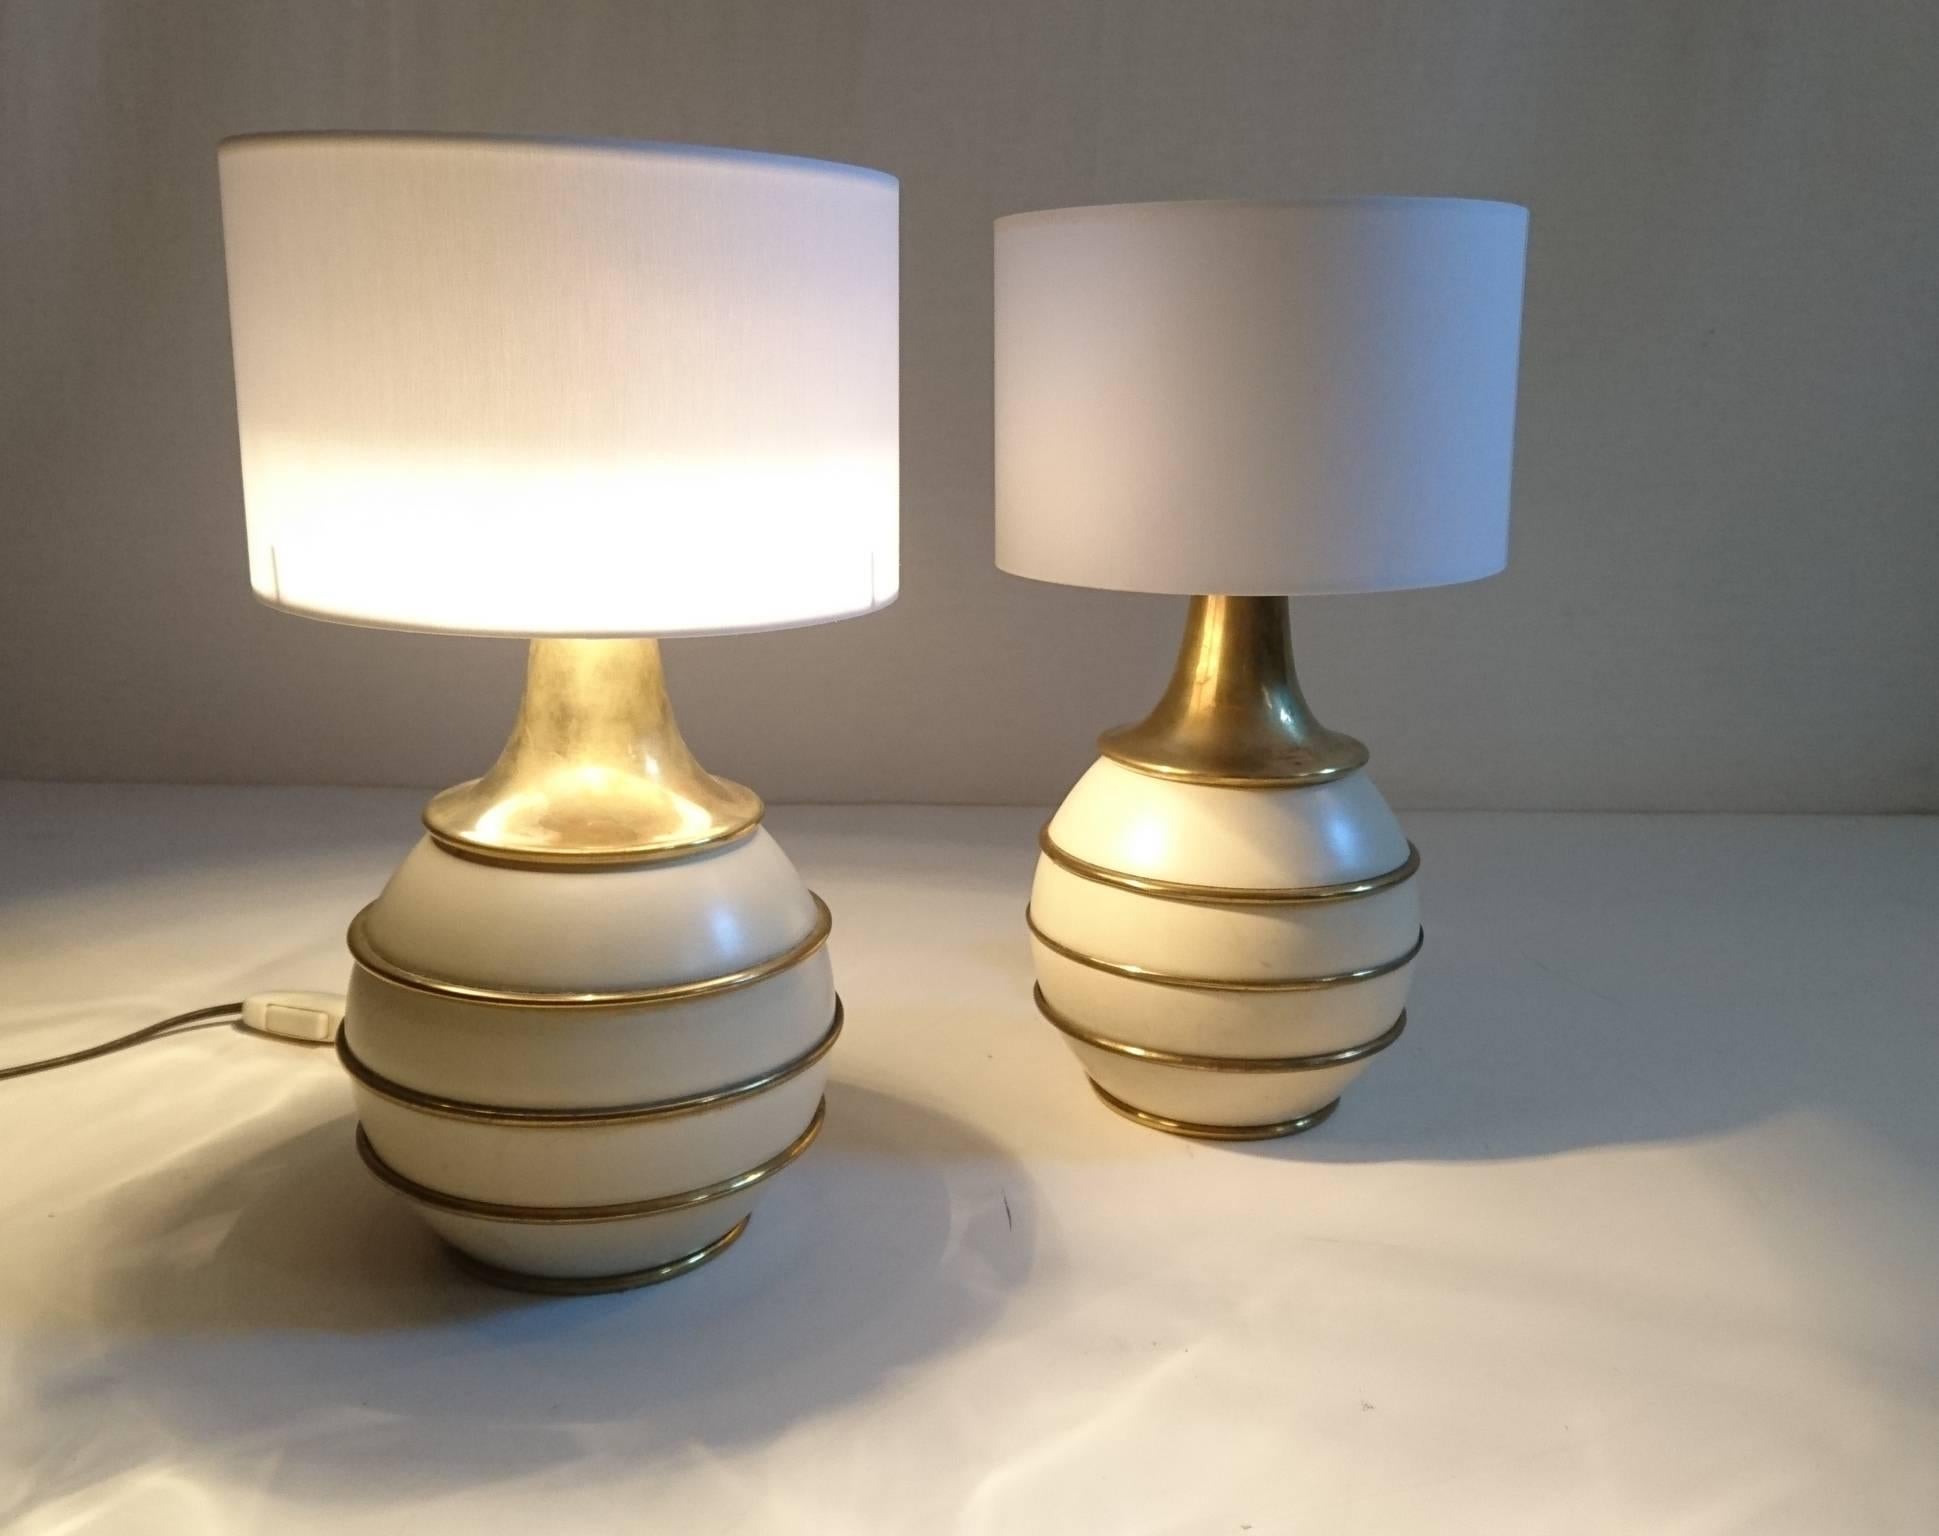 Exquisite lamps of a very high quality and quite solid/heavy by Italian producer PAF. Made in brass and ivory colored powder coated metal. Comes with brand new white shades in cotton.
Should you want other lampshades be it shape, size or color we